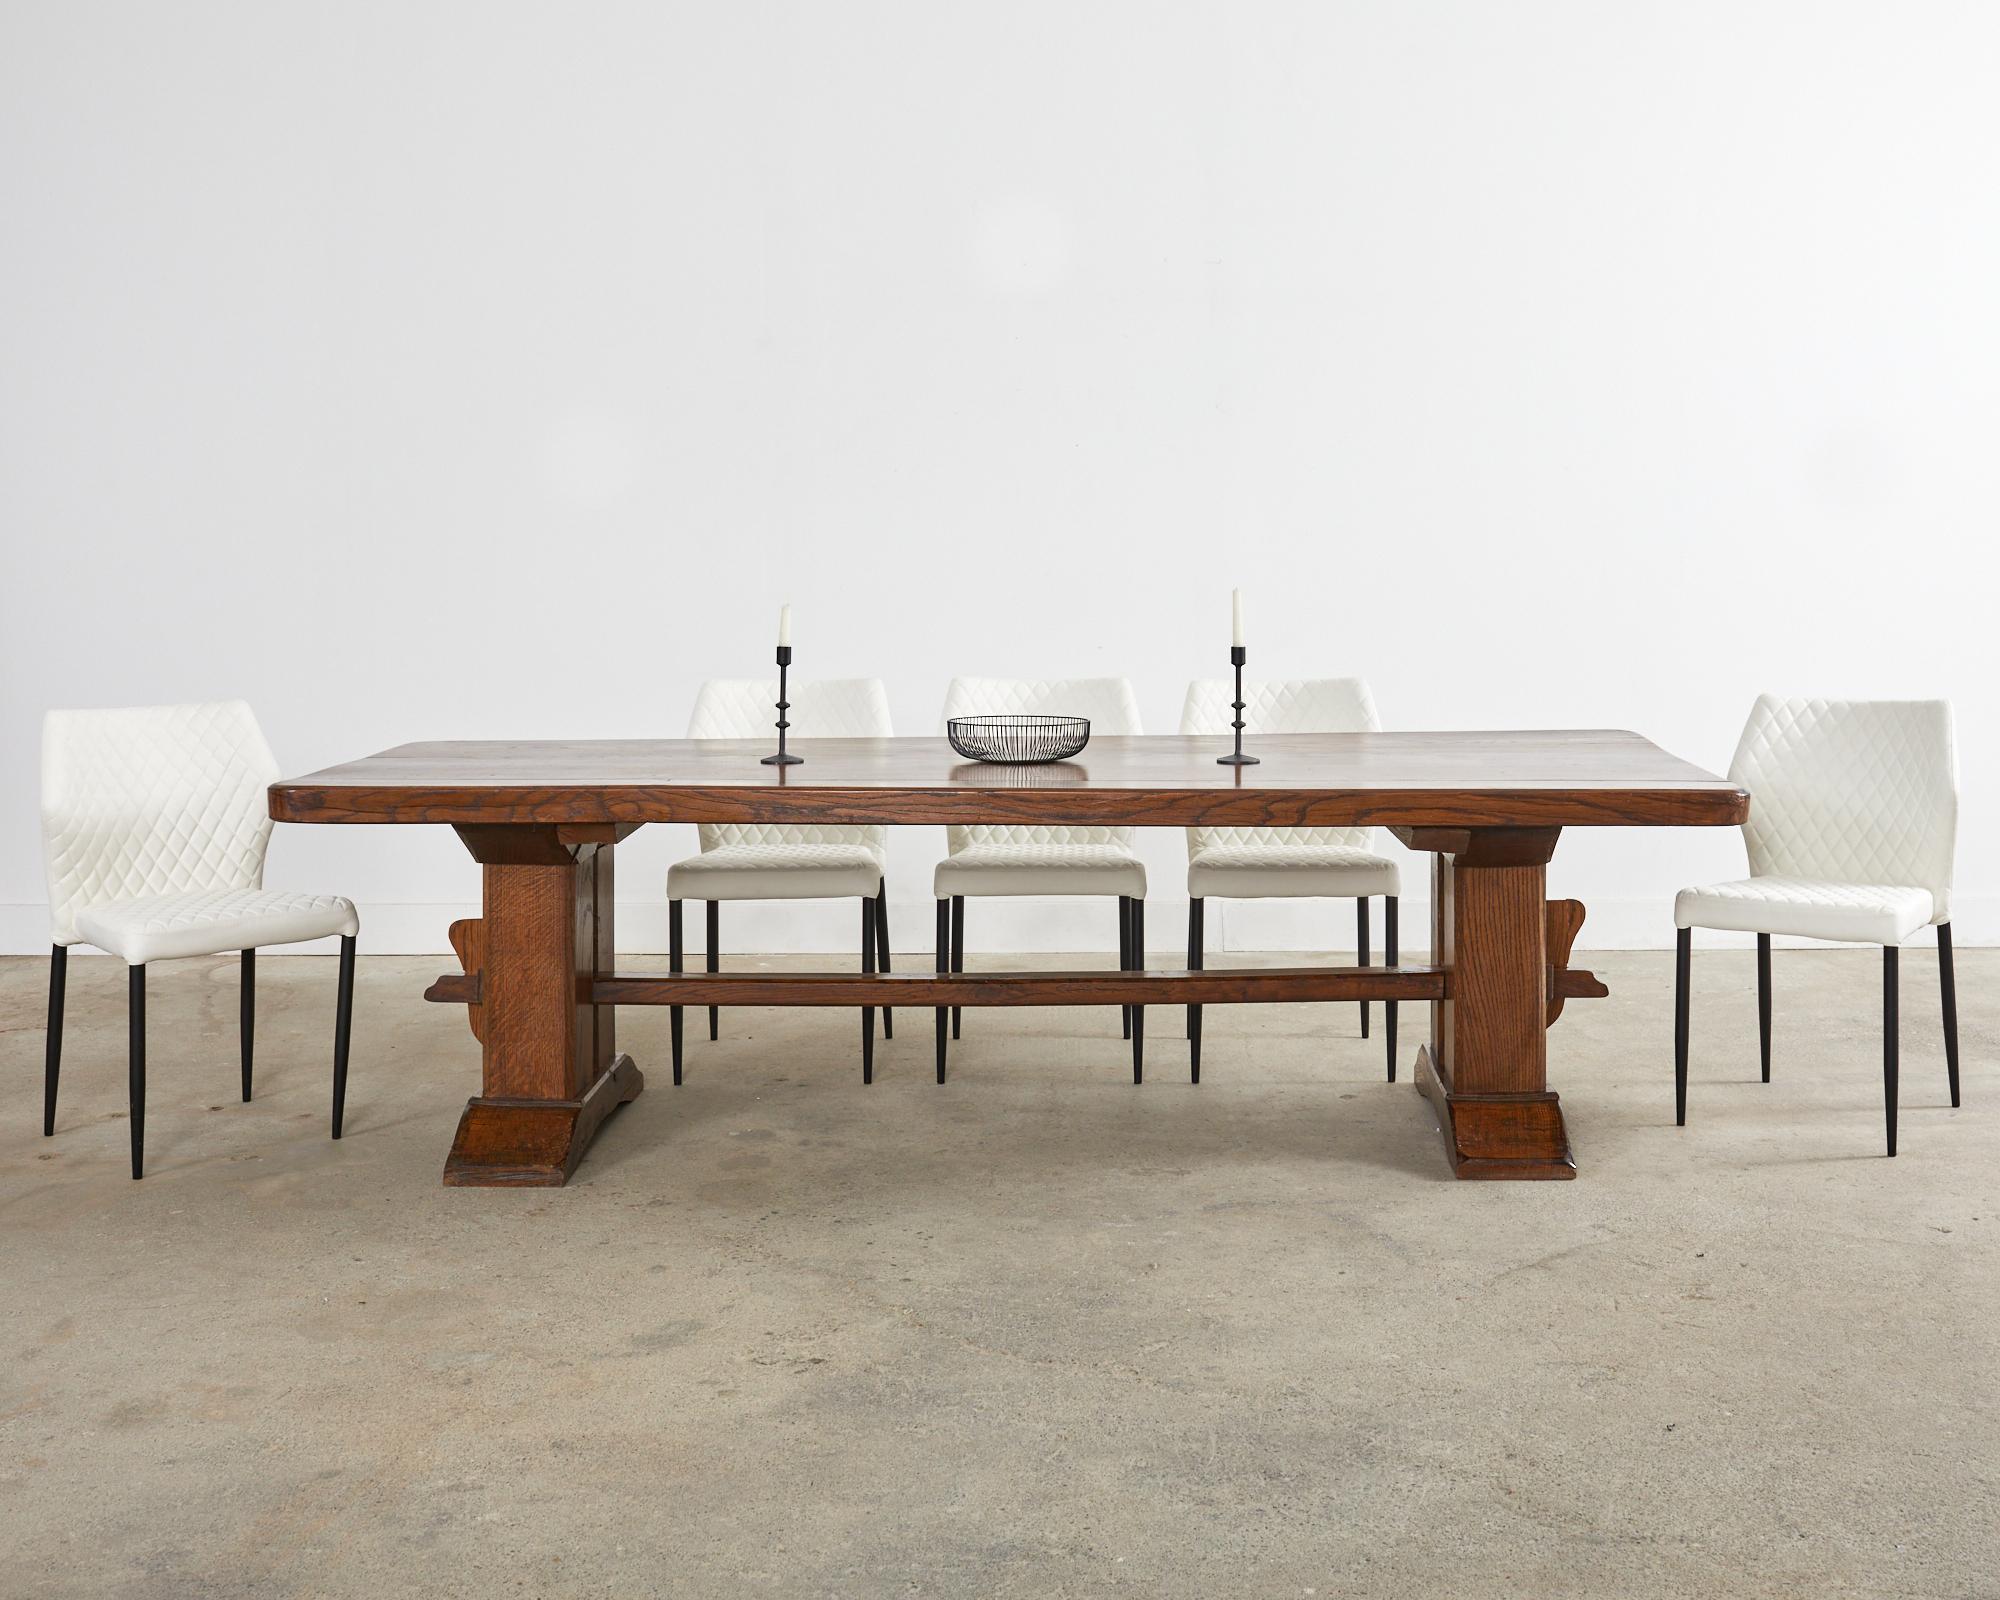 Substantial French decorative Arts & Crafts farmhouse dining table crafted from massive French oak timbers. The solid rectangular top is 2.5 inches thick and supported by a trestle base. The monumental legs are conjoined by a stretcher with exposed